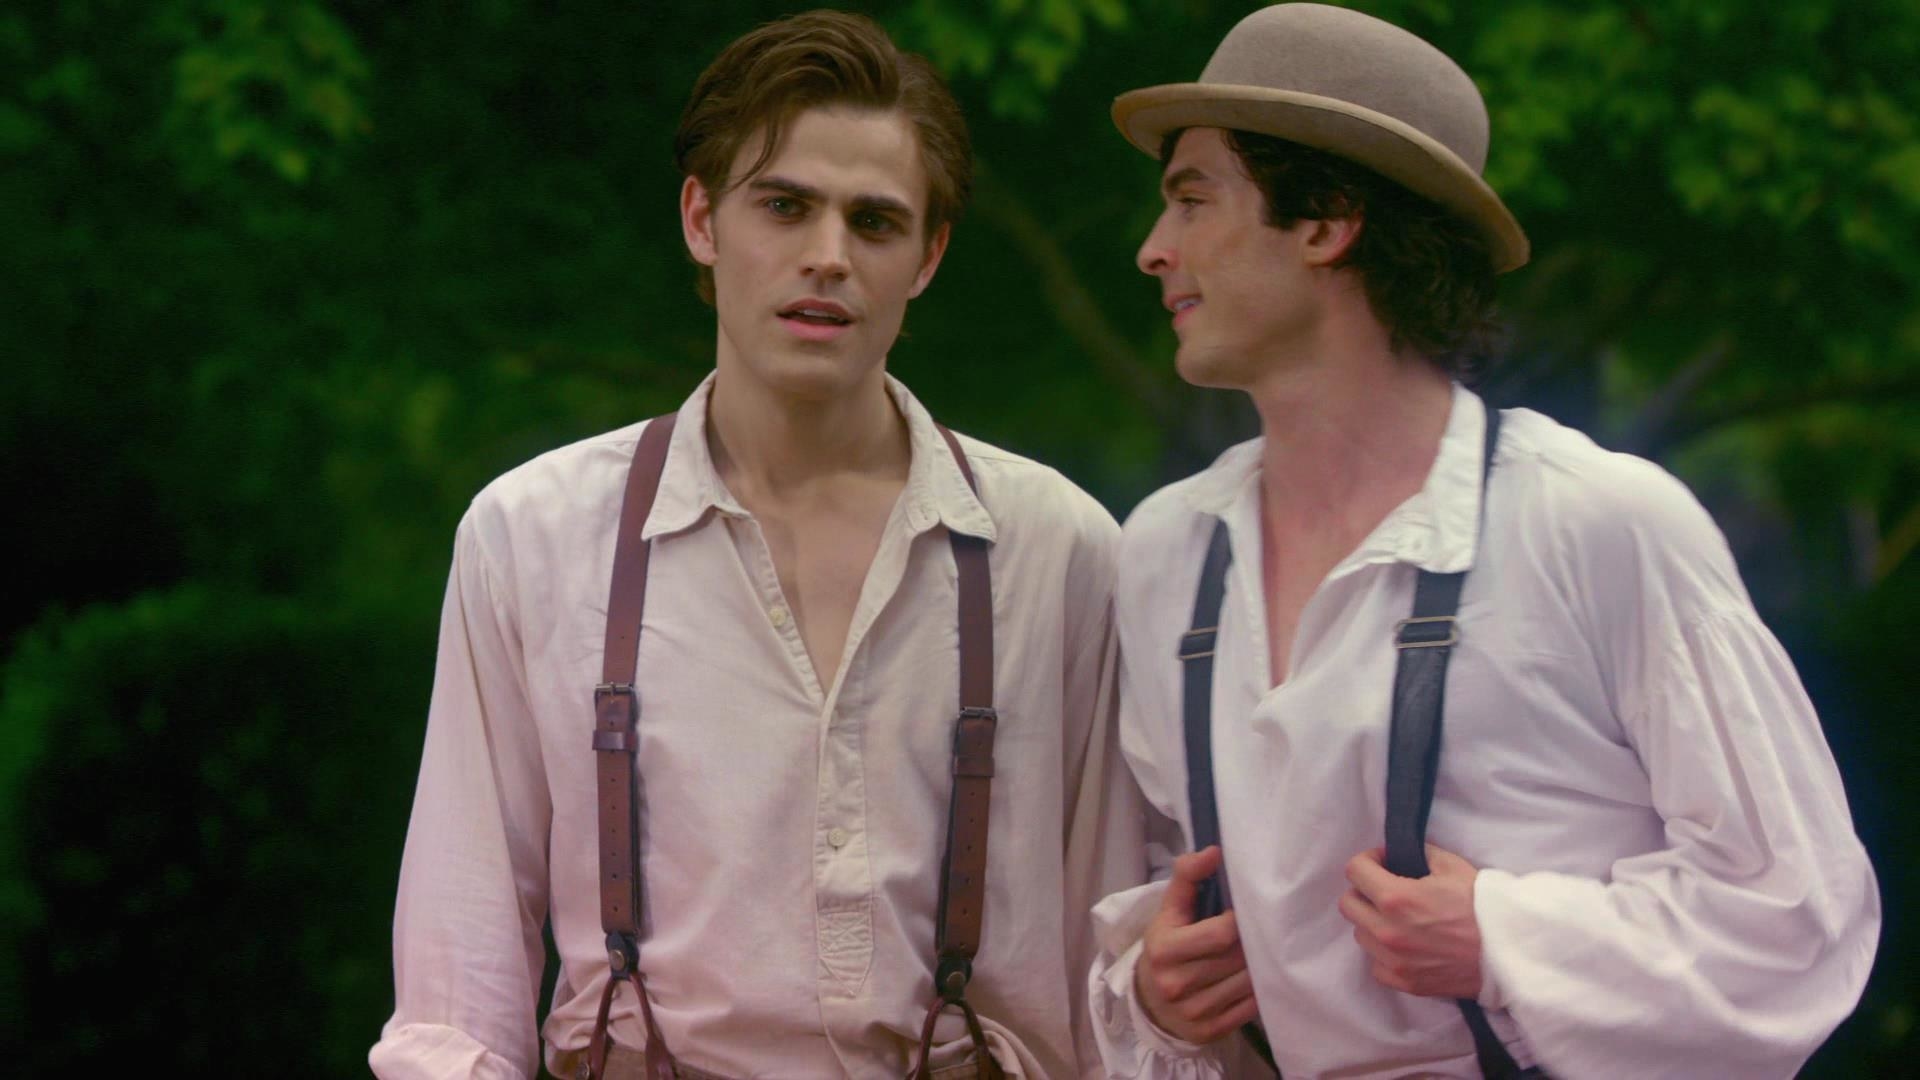 damon and stefan wear button down shirts and suspenders as if in the early 1800s